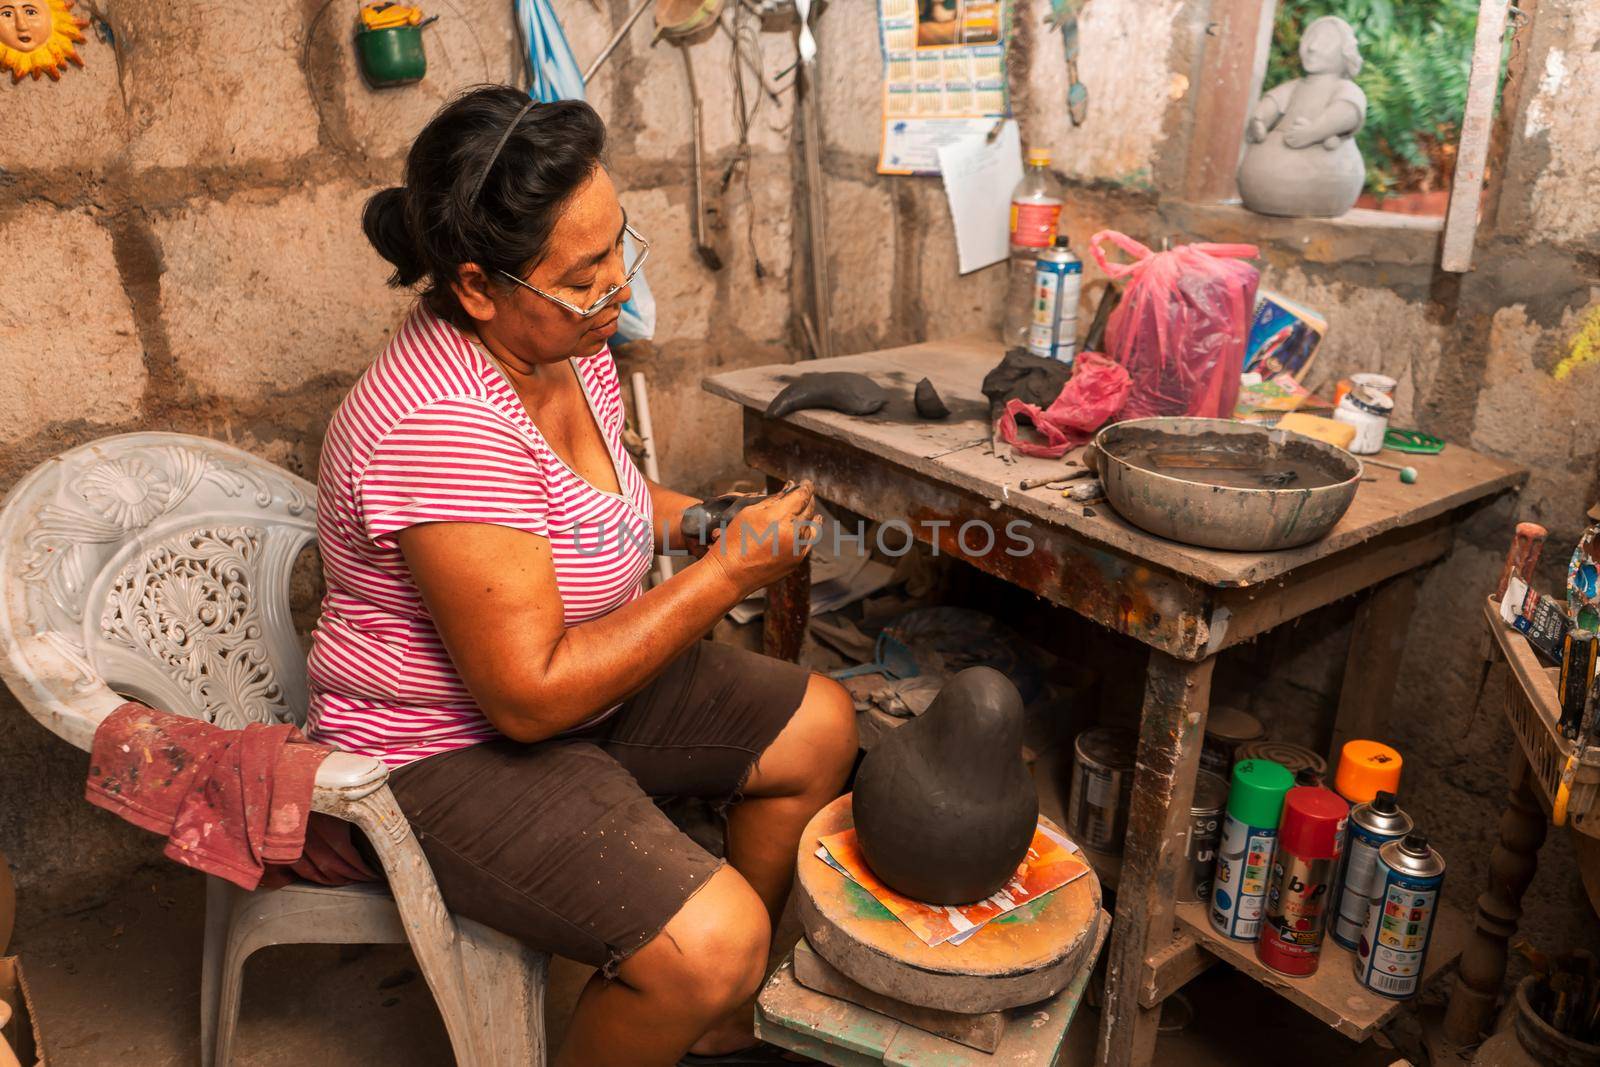 Craftswoman from Nicaragua, La Paz center, molding clay pieces in her workshop in La Paz Centro, Leon